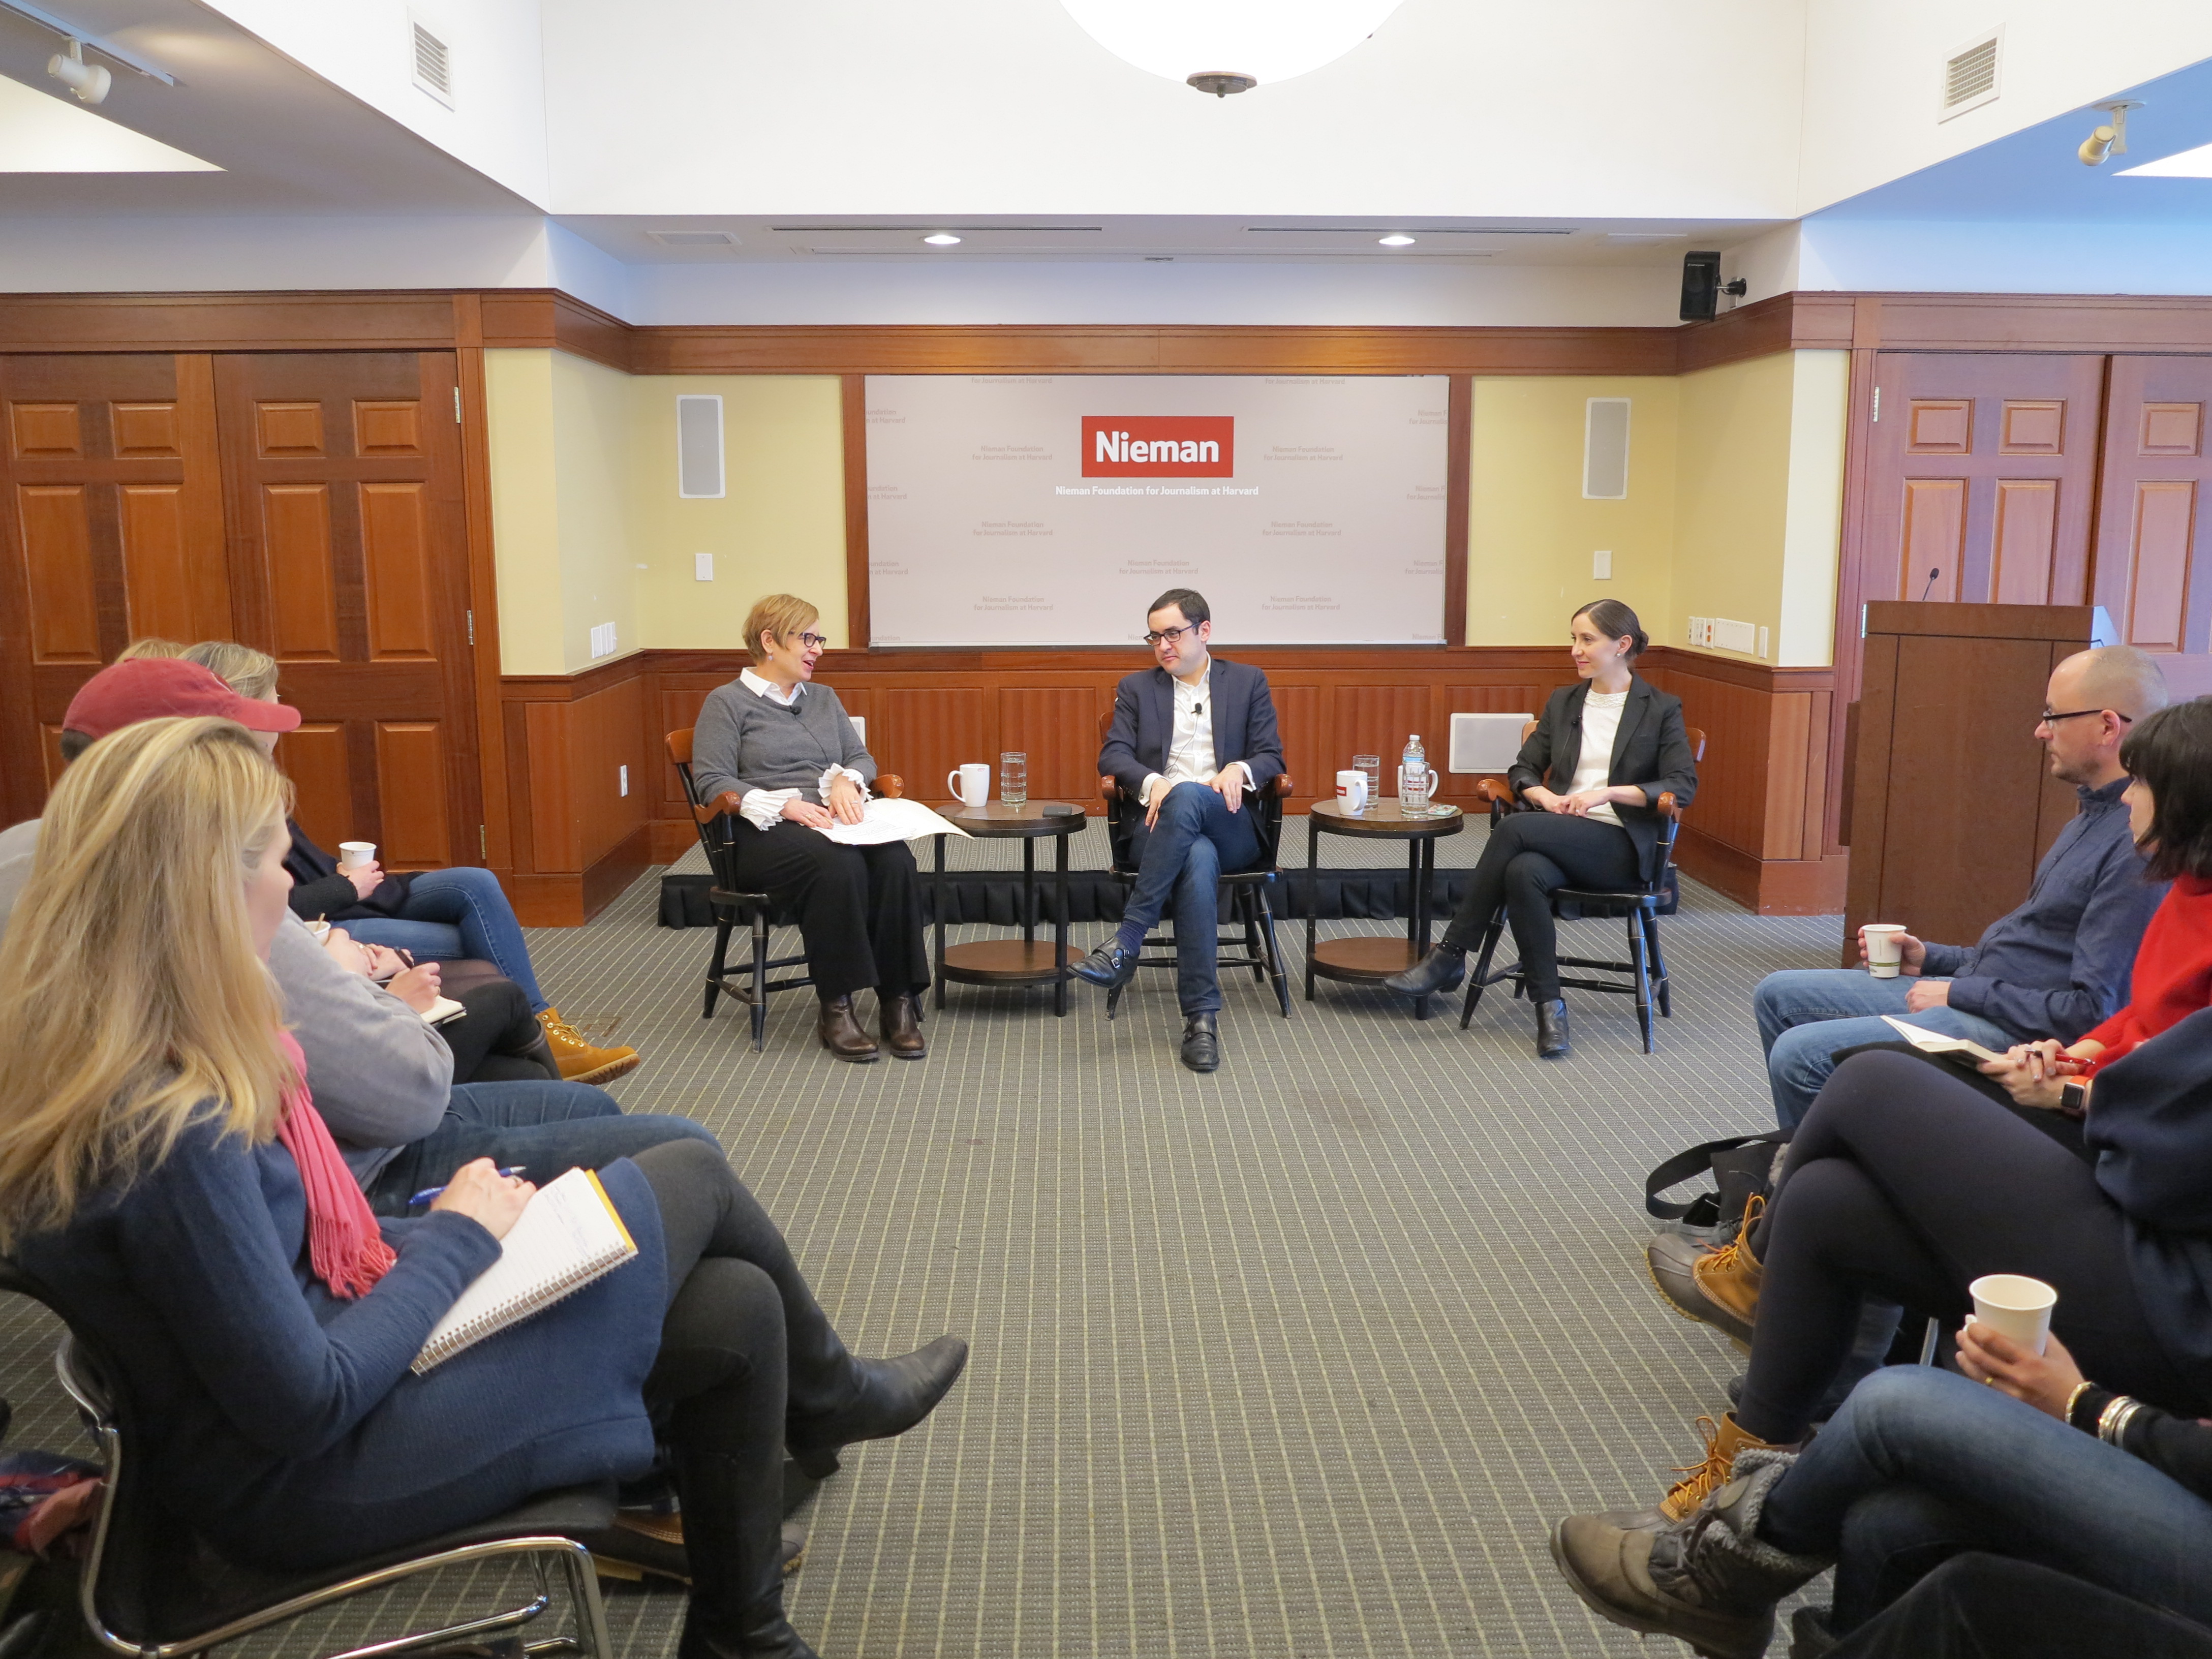 New York Times reporters Michael Schmidt and Emily Steel, with Nieman curator Ann Marie Lipinski, visited the Nieman Foundation to discuss their coverage of sexual harassment at Fox